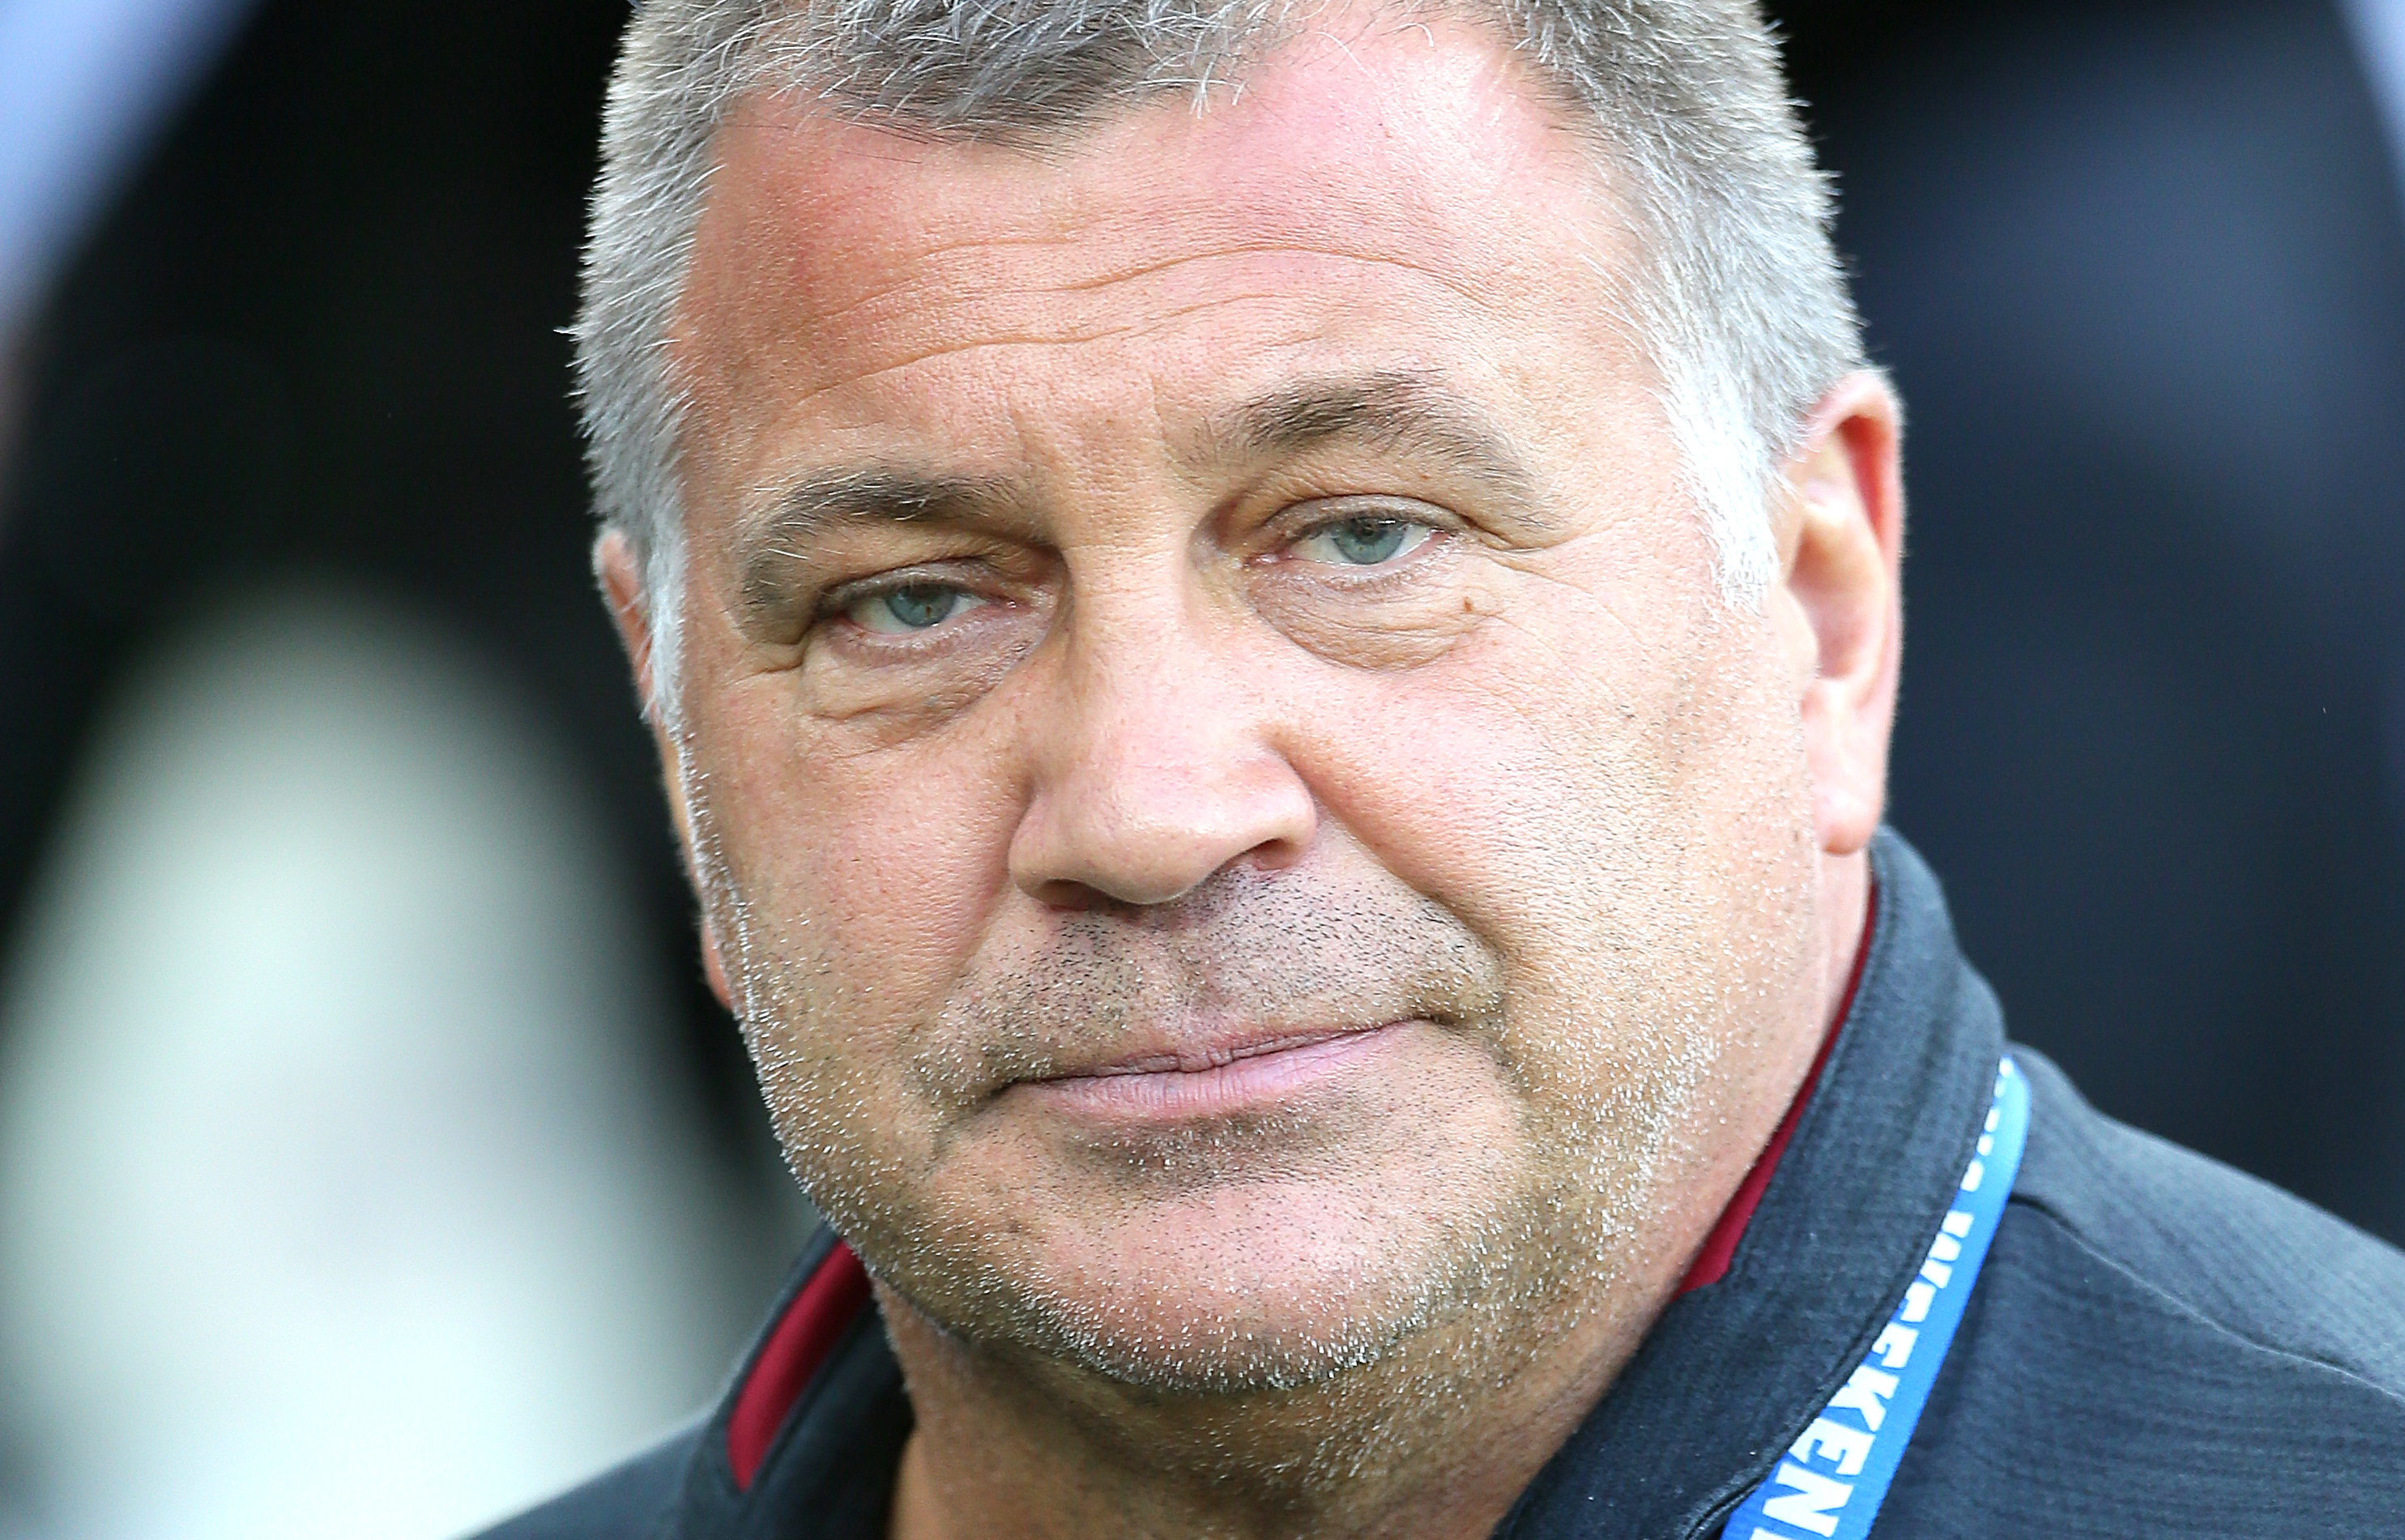 Wigan warriors Head Coach Shaun Wane is joining the Scotland rugby union set-up.